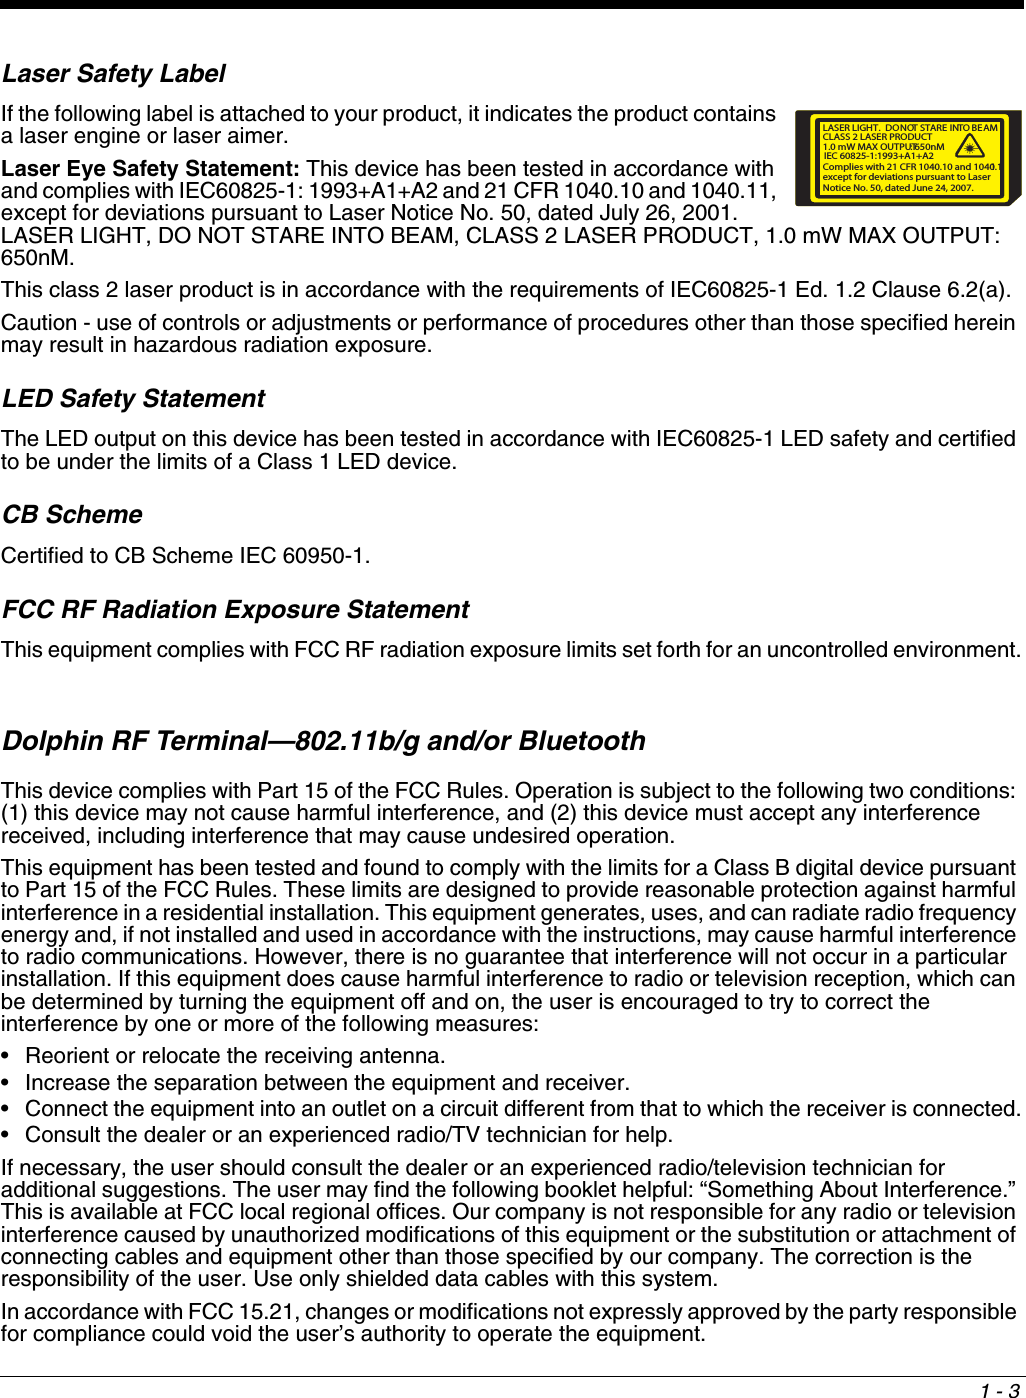 1 - 3Laser Safety LabelIf the following label is attached to your product, it indicates the product contains a laser engine or laser aimer. Laser Eye Safety Statement: This device has been tested in accordance with and complies with IEC60825-1: 1993+A1+A2 and 21 CFR 1040.10 and 1040.11, except for deviations pursuant to Laser Notice No. 50, dated July 26, 2001. LASER LIGHT, DO NOT STARE INTO BEAM, CLASS 2 LASER PRODUCT, 1.0 mW MAX OUTPUT: 650nM.This class 2 laser product is in accordance with the requirements of IEC60825-1 Ed. 1.2 Clause 6.2(a).Caution - use of controls or adjustments or performance of procedures other than those specified herein may result in hazardous radiation exposure.LED Safety StatementThe LED output on this device has been tested in accordance with IEC60825-1 LED safety and certified to be under the limits of a Class 1 LED device.CB SchemeCertified to CB Scheme IEC 60950-1.FCC RF Radiation Exposure StatementThis equipment complies with FCC RF radiation exposure limits set forth for an uncontrolled environment.Dolphin RF Terminal—802.11b/g and/or BluetoothThis device complies with Part 15 of the FCC Rules. Operation is subject to the following two conditions: (1) this device may not cause harmful interference, and (2) this device must accept any interference received, including interference that may cause undesired operation.This equipment has been tested and found to comply with the limits for a Class B digital device pursuant to Part 15 of the FCC Rules. These limits are designed to provide reasonable protection against harmful interference in a residential installation. This equipment generates, uses, and can radiate radio frequency energy and, if not installed and used in accordance with the instructions, may cause harmful interference to radio communications. However, there is no guarantee that interference will not occur in a particular installation. If this equipment does cause harmful interference to radio or television reception, which can be determined by turning the equipment off and on, the user is encouraged to try to correct the interference by one or more of the following measures:• Reorient or relocate the receiving antenna.• Increase the separation between the equipment and receiver.• Connect the equipment into an outlet on a circuit different from that to which the receiver is connected.• Consult the dealer or an experienced radio/TV technician for help.If necessary, the user should consult the dealer or an experienced radio/television technician for additional suggestions. The user may find the following booklet helpful: “Something About Interference.” This is available at FCC local regional offices. Our company is not responsible for any radio or television interference caused by unauthorized modifications of this equipment or the substitution or attachment of connecting cables and equipment other than those specified by our company. The correction is the responsibility of the user. Use only shielded data cables with this system.In accordance with FCC 15.21, changes or modifications not expressly approved by the party responsible for compliance could void the user’s authority to operate the equipment.LASER LIGHT.DONOT STARE INTO BEAM1.0 mW MAX OUTPUT: 650nMIEC 60825-1:1993+A1+A2CLASS 2 LASER PRODUCTComplies with 21 CFR 1040.10 and 1040.11except for deviations pursuant to Laser Notice No. 50, dated June 24, 2007.